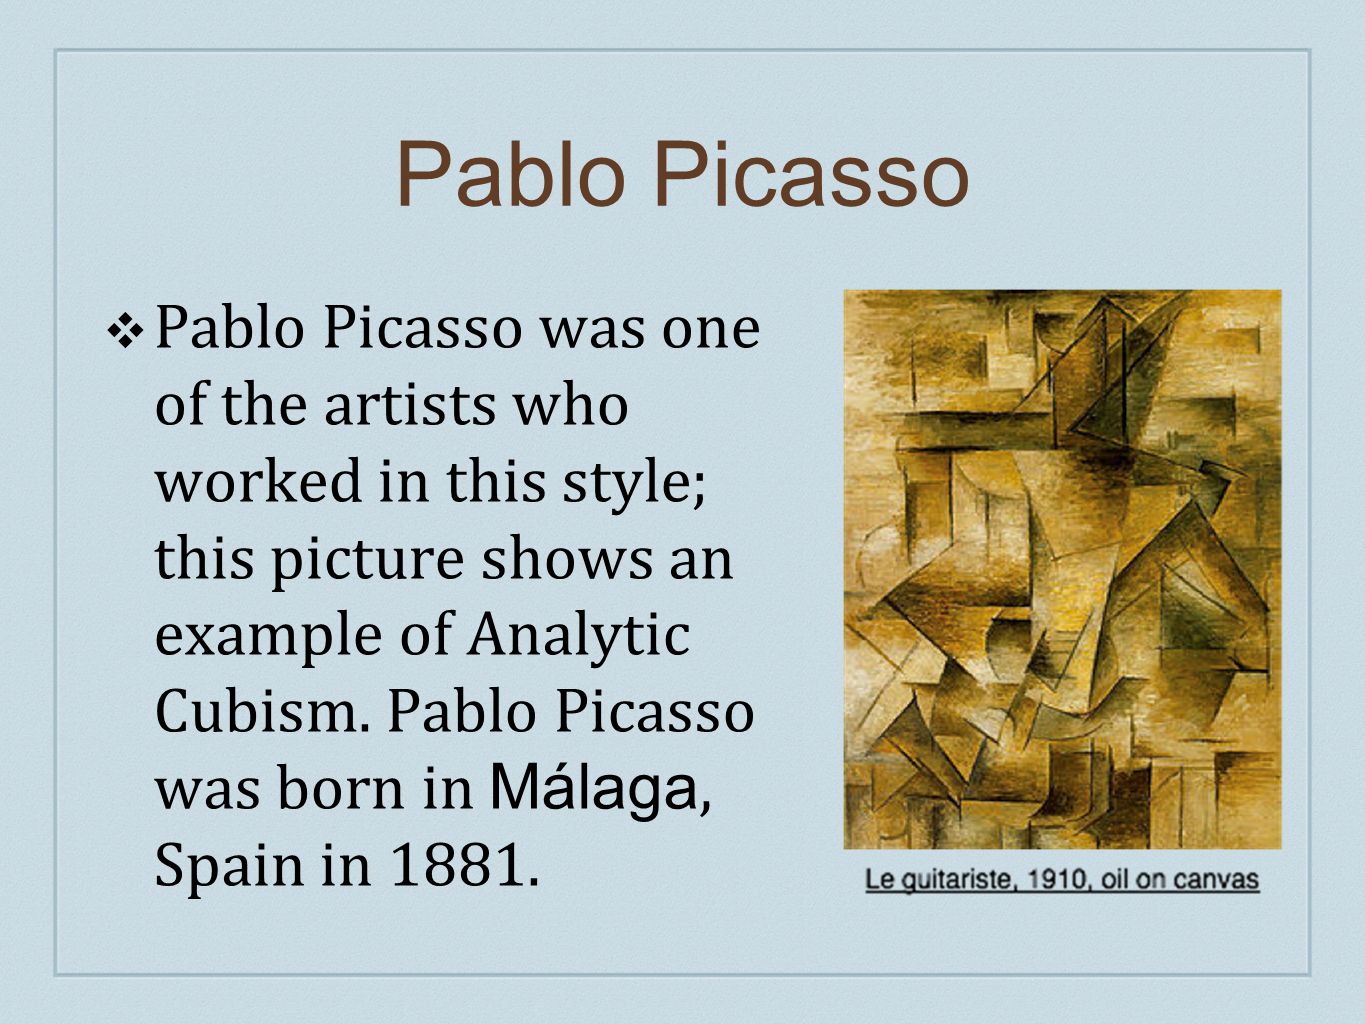 Pablo Picasso ❖ Pablo Picasso was one of the artists who worked in this style; this picture shows an example of Analytic Cubism.